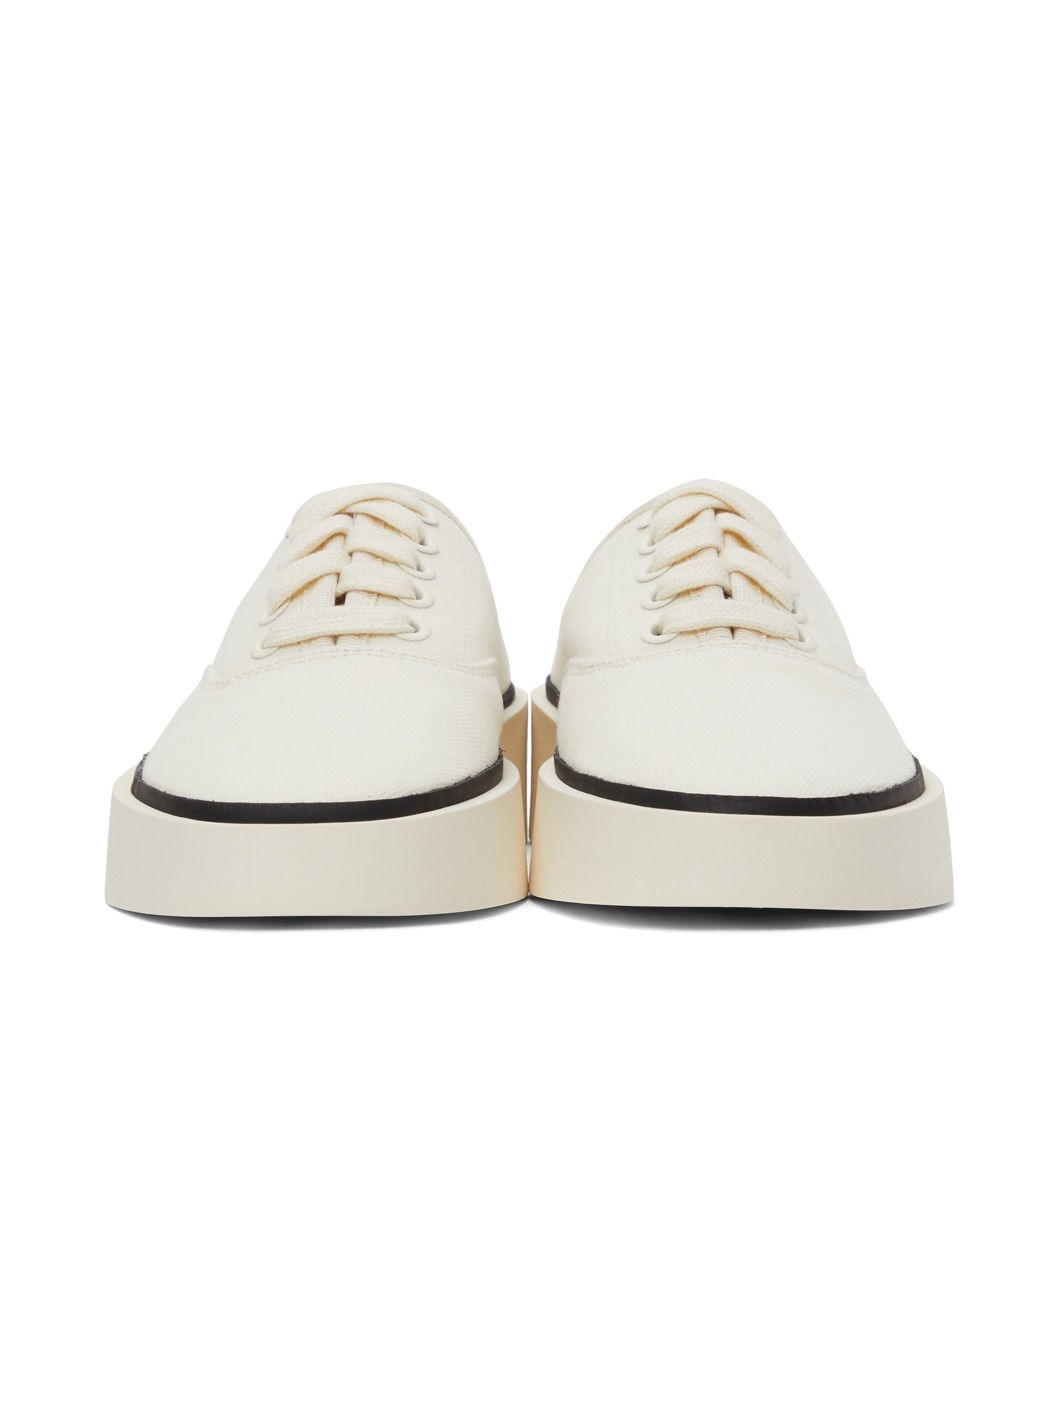 White Canvas 101 Backless Sneakers - 2